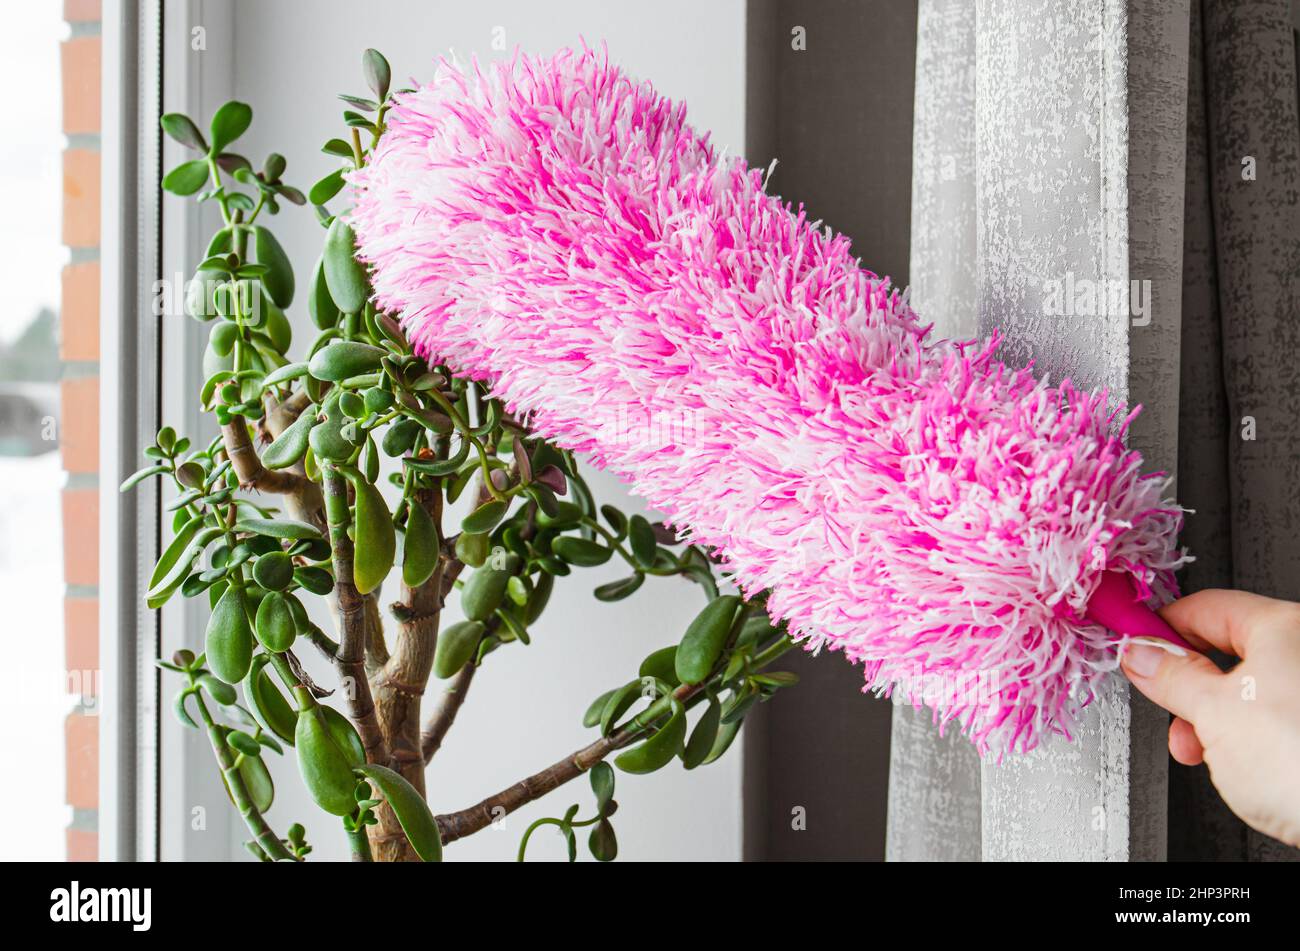 Person hand use microfiber duster to dust the Crassula Ovata plant's leaves, cleaning flower from dust indoors at home. Stock Photo